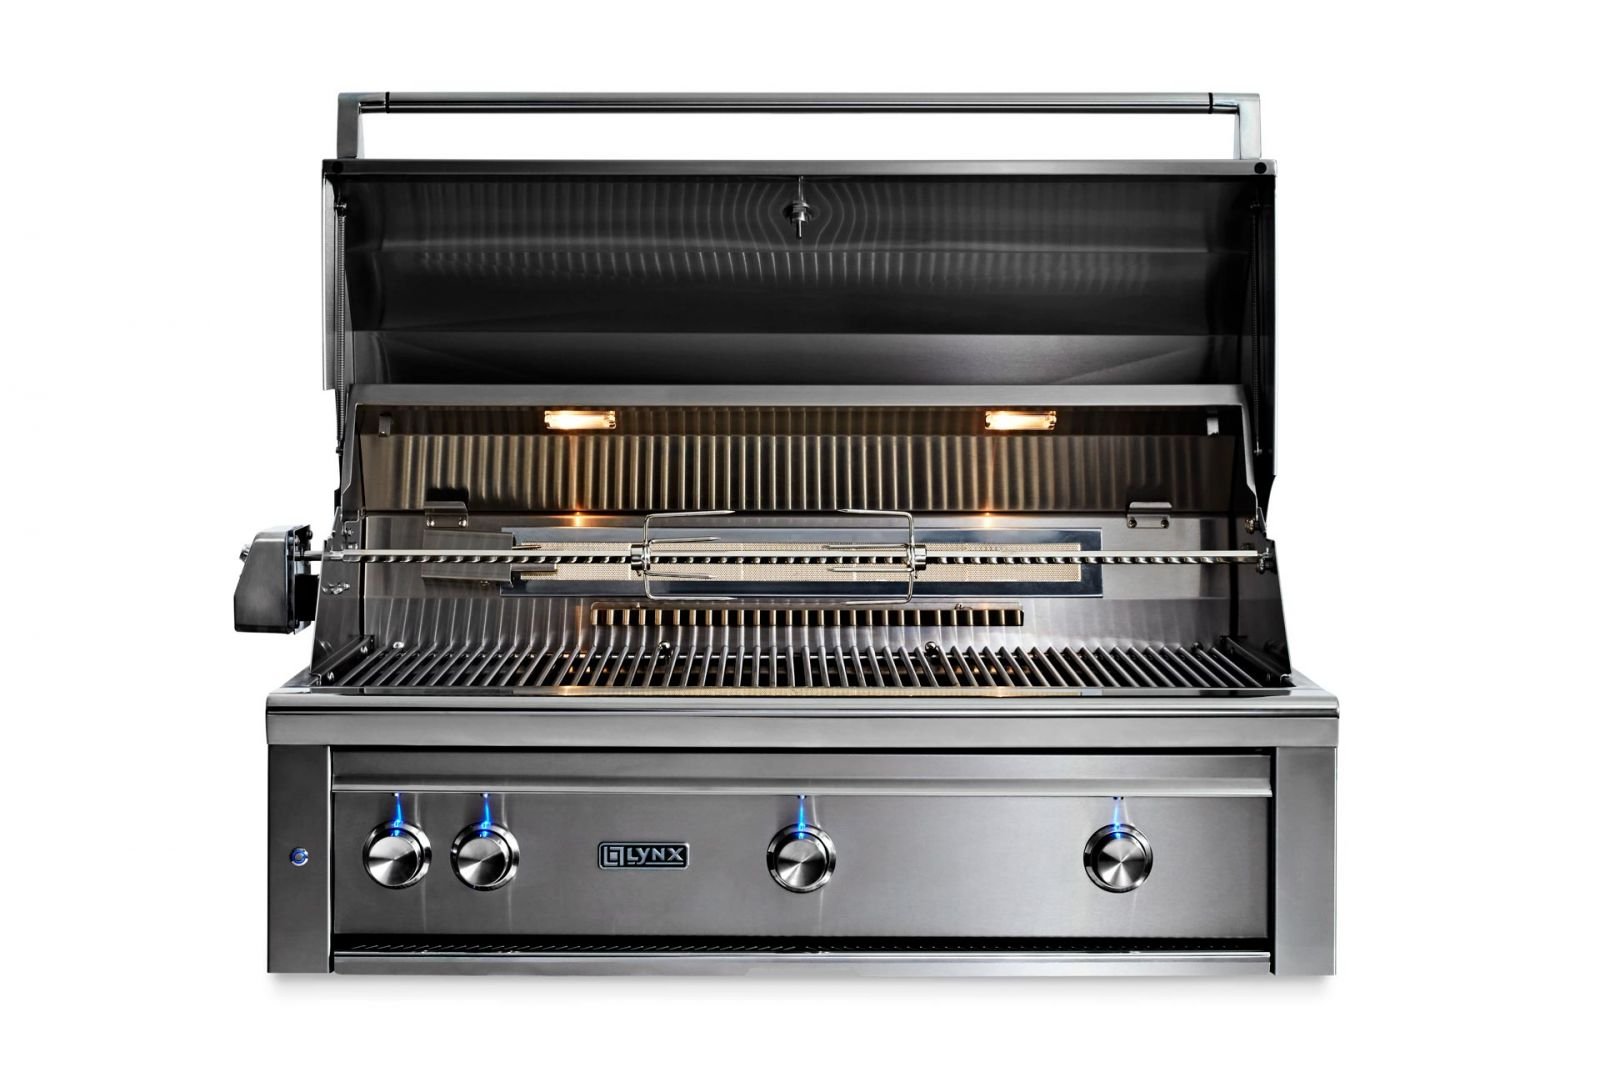 Lynx 42" Professional Built-In Grill with All Trident Infrared Burners and Rotisserie (L42ATR)